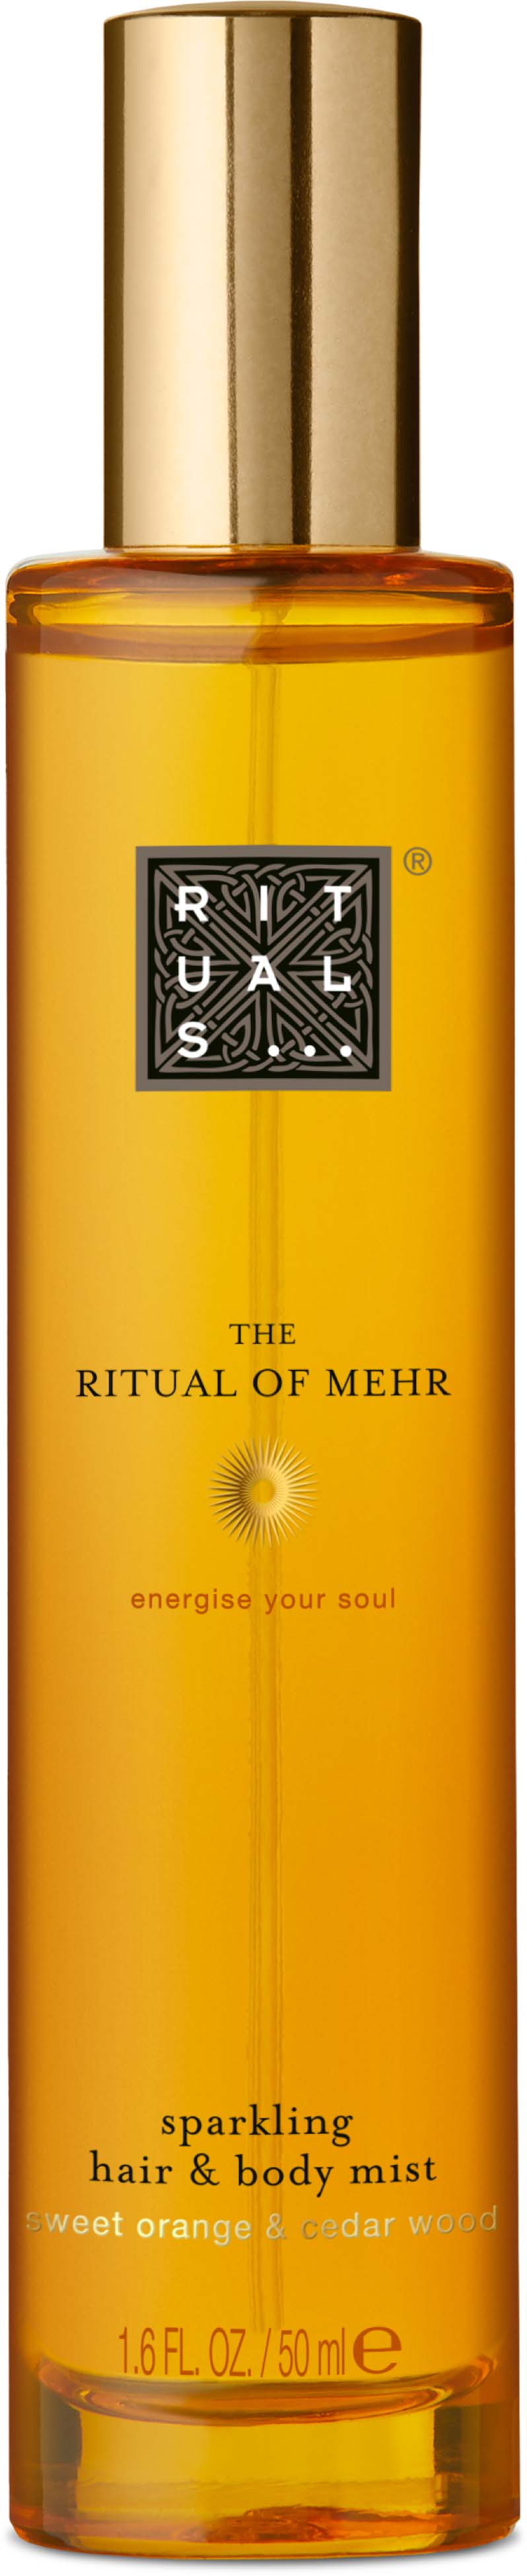 https://lyko.com/globalassets/product-images/rituals-the-ritual-of-mehr-hair---body-mist-50ml-1808-732-0050_1.jpg?ref=0158F22FF1